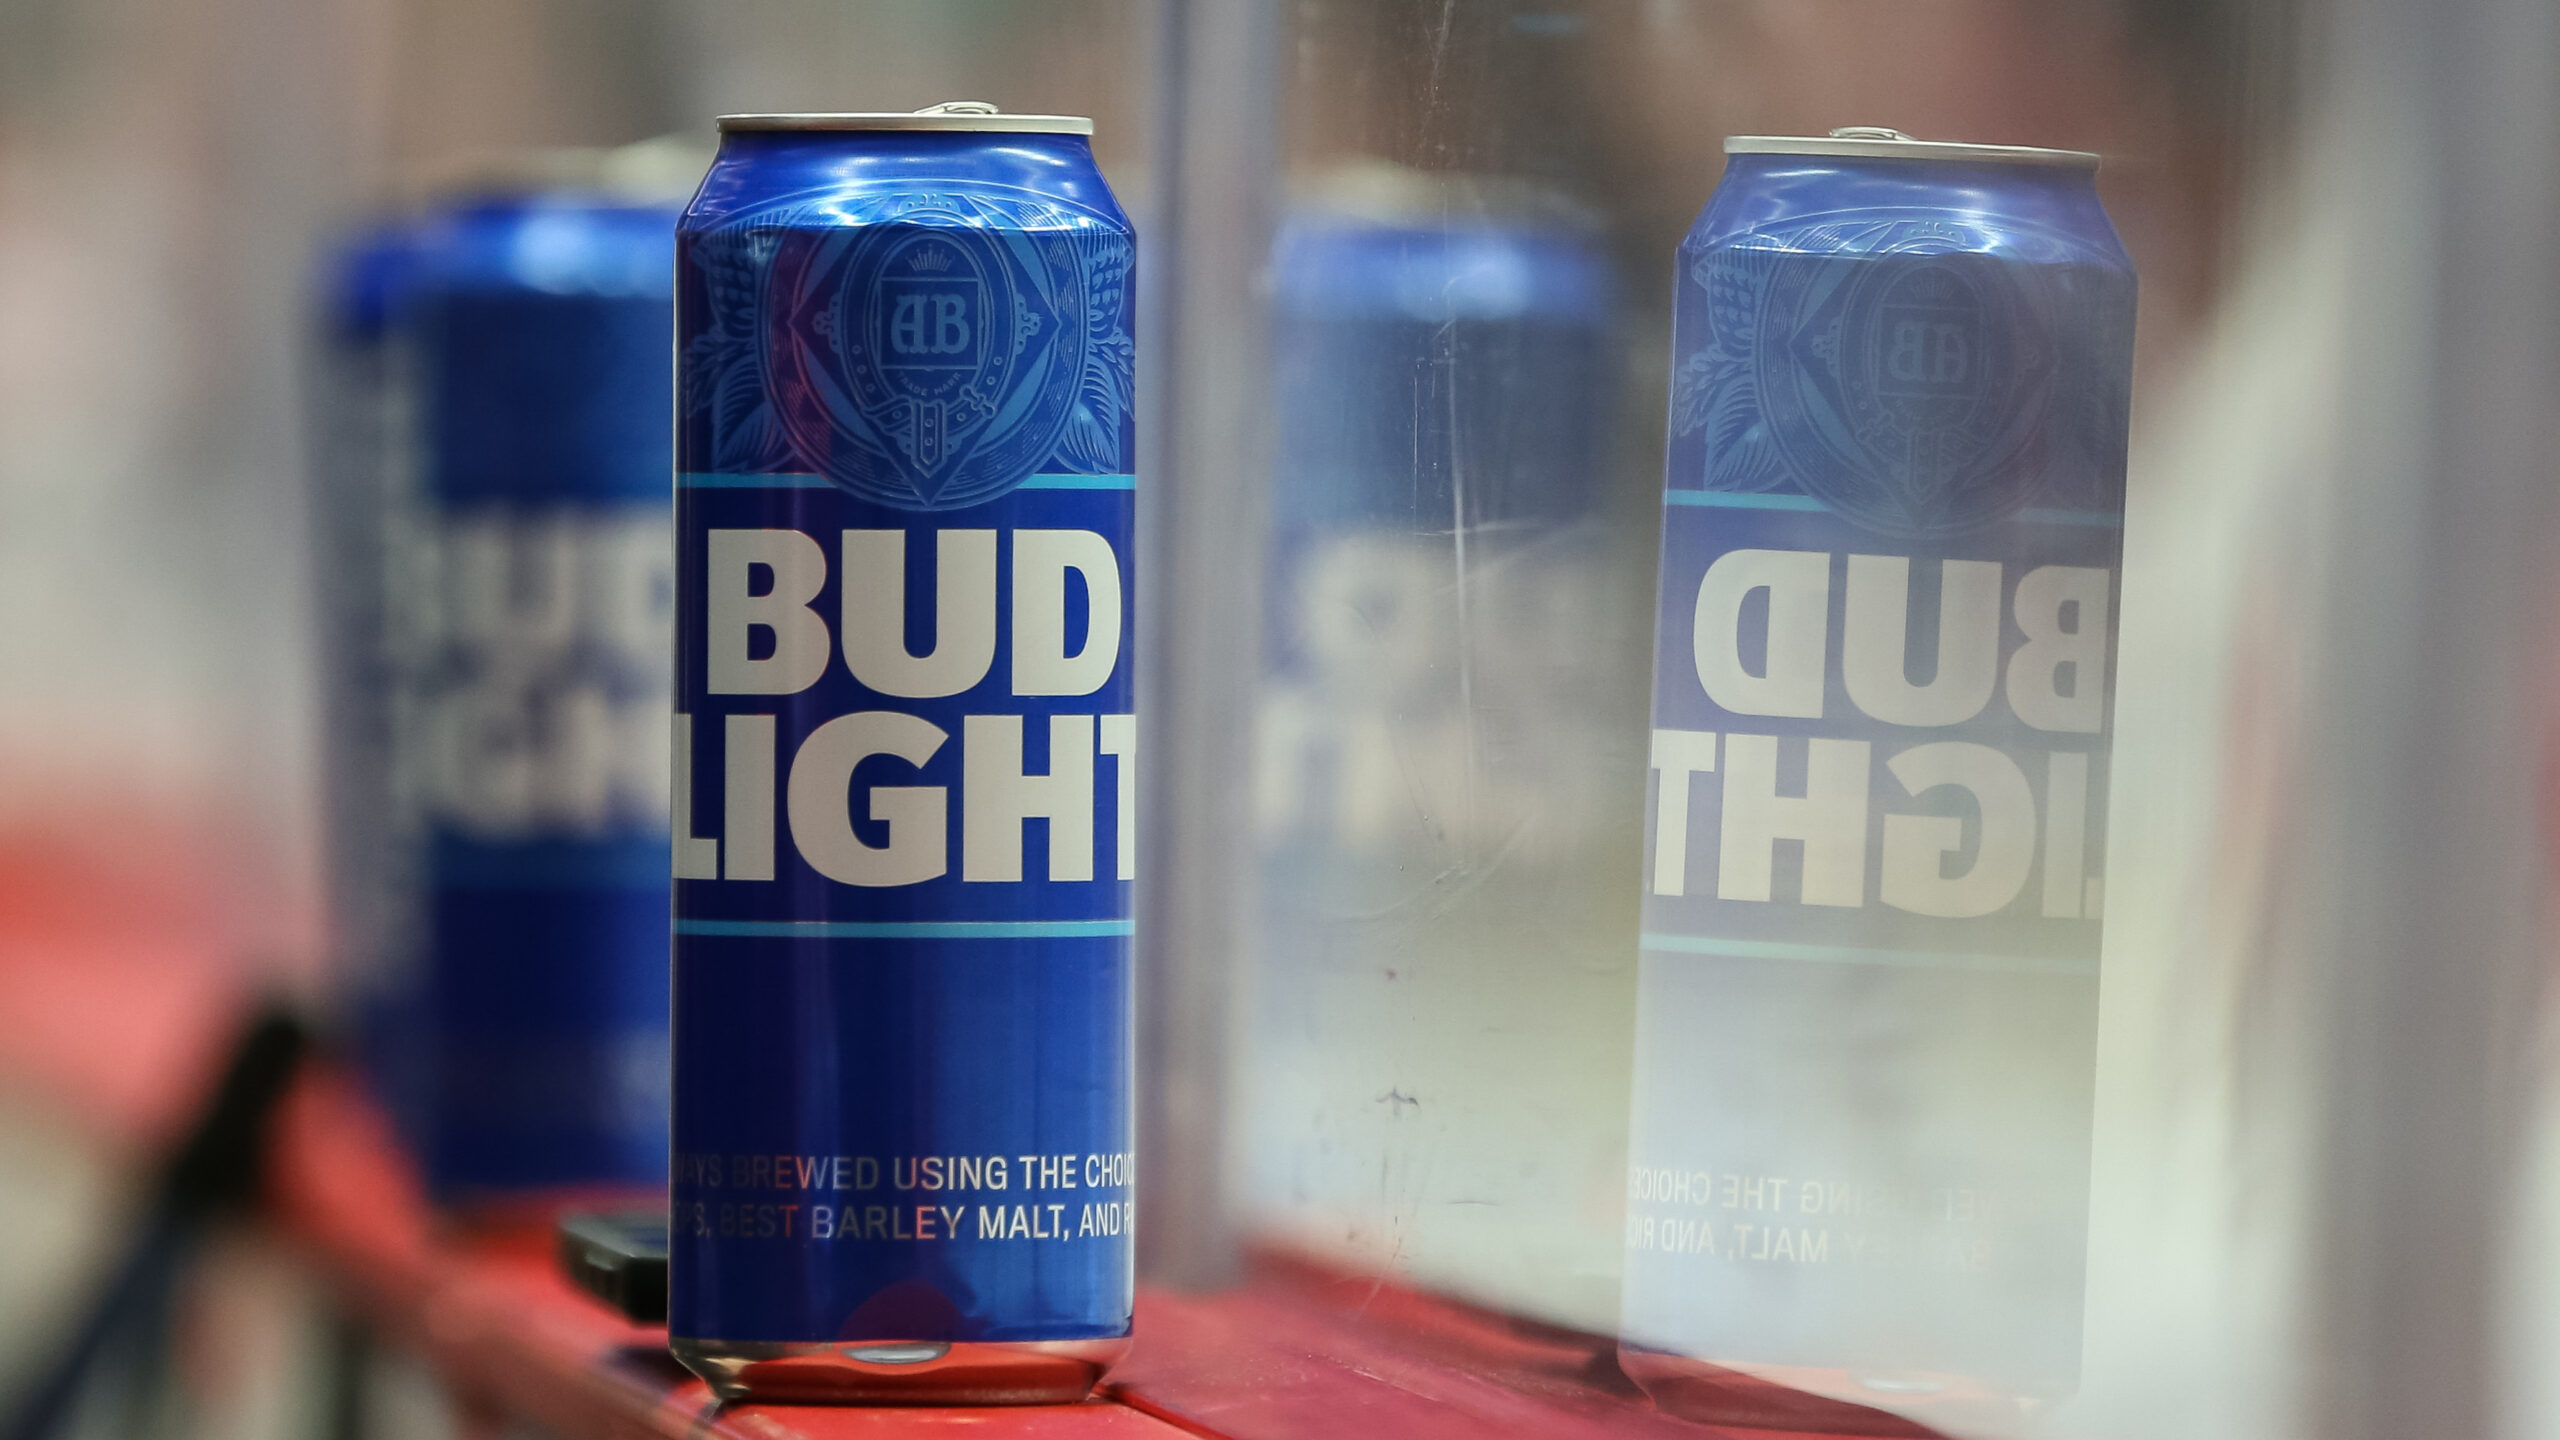 Bud Light and Budweiser launch limited edition Harley Davidson cans in response to declining sales.